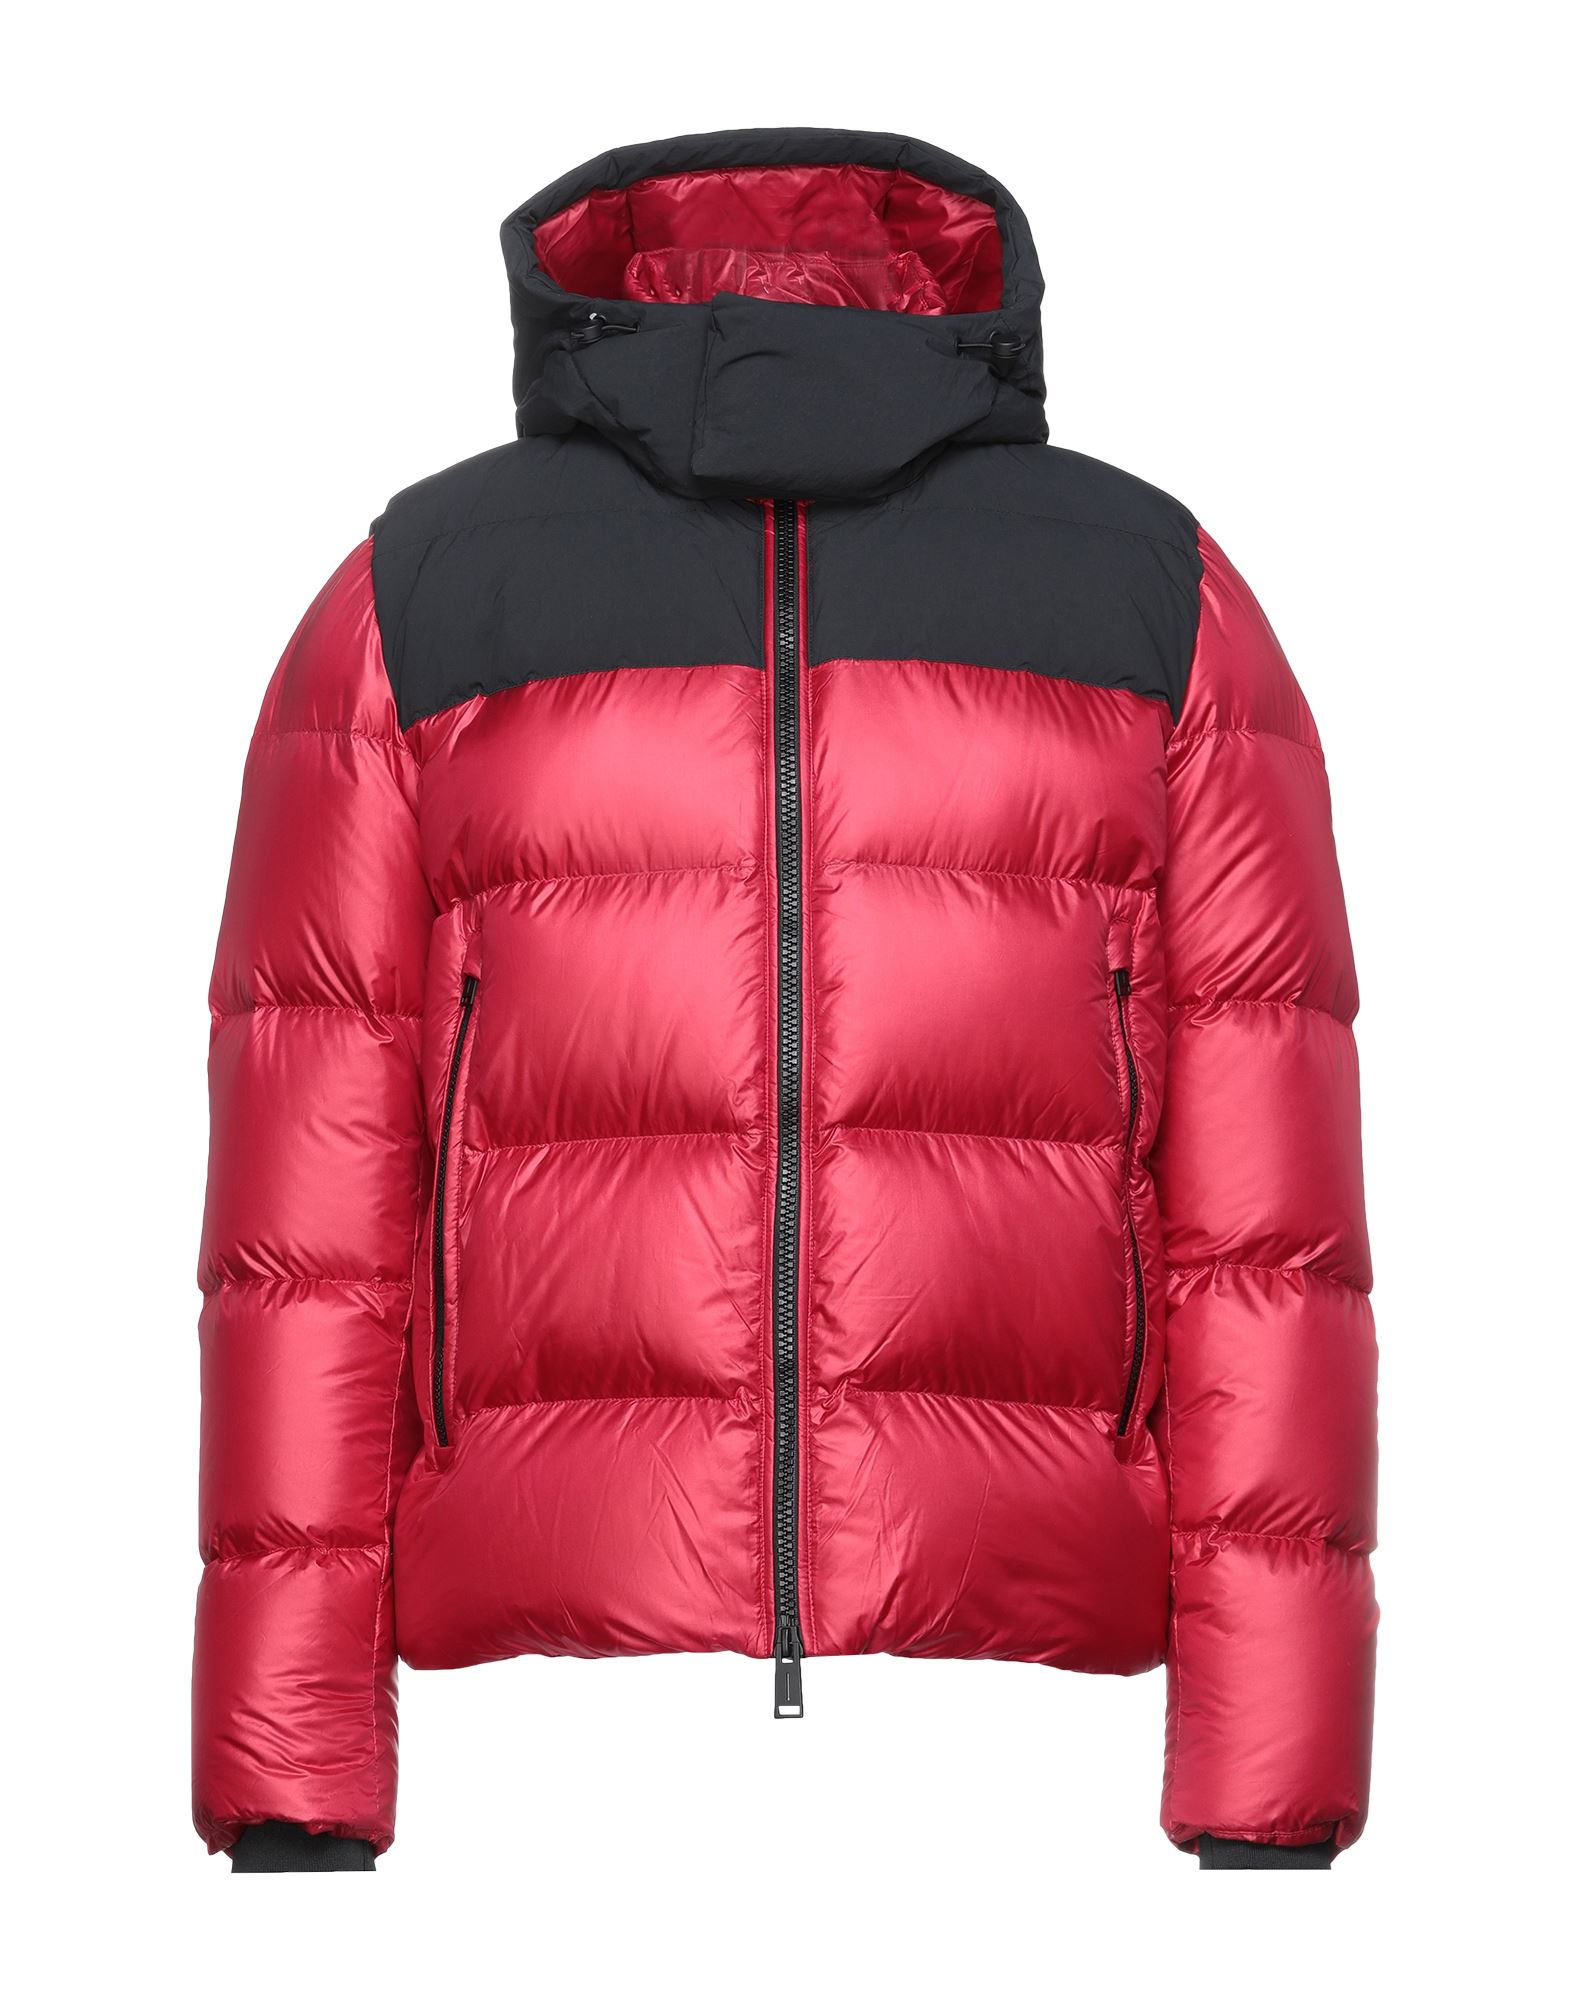 Add Down Jackets In Red